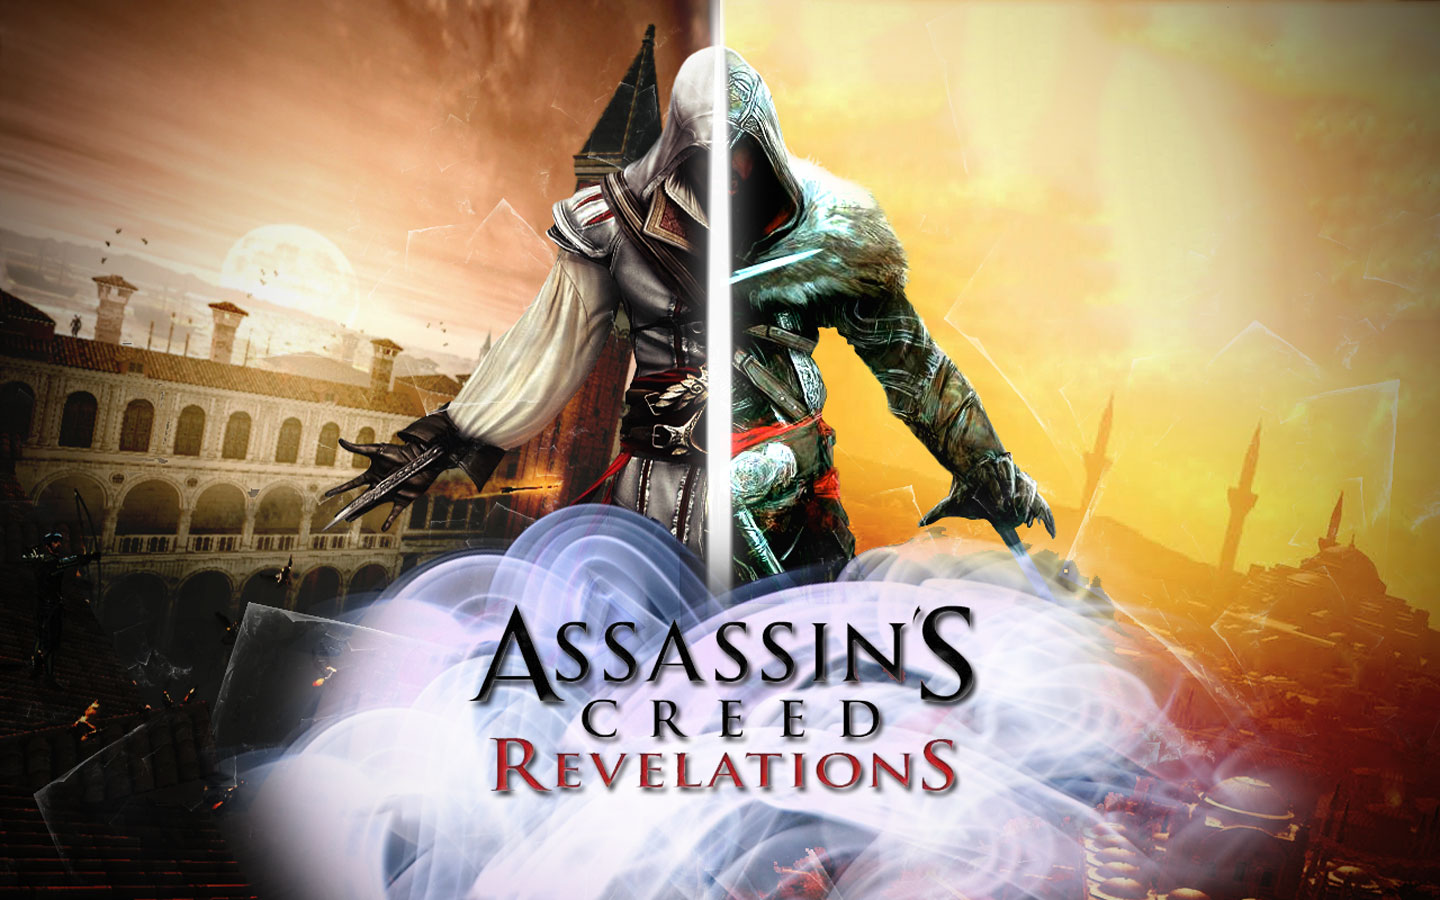 Gamerzz Hell Assassin S Creed Revelations